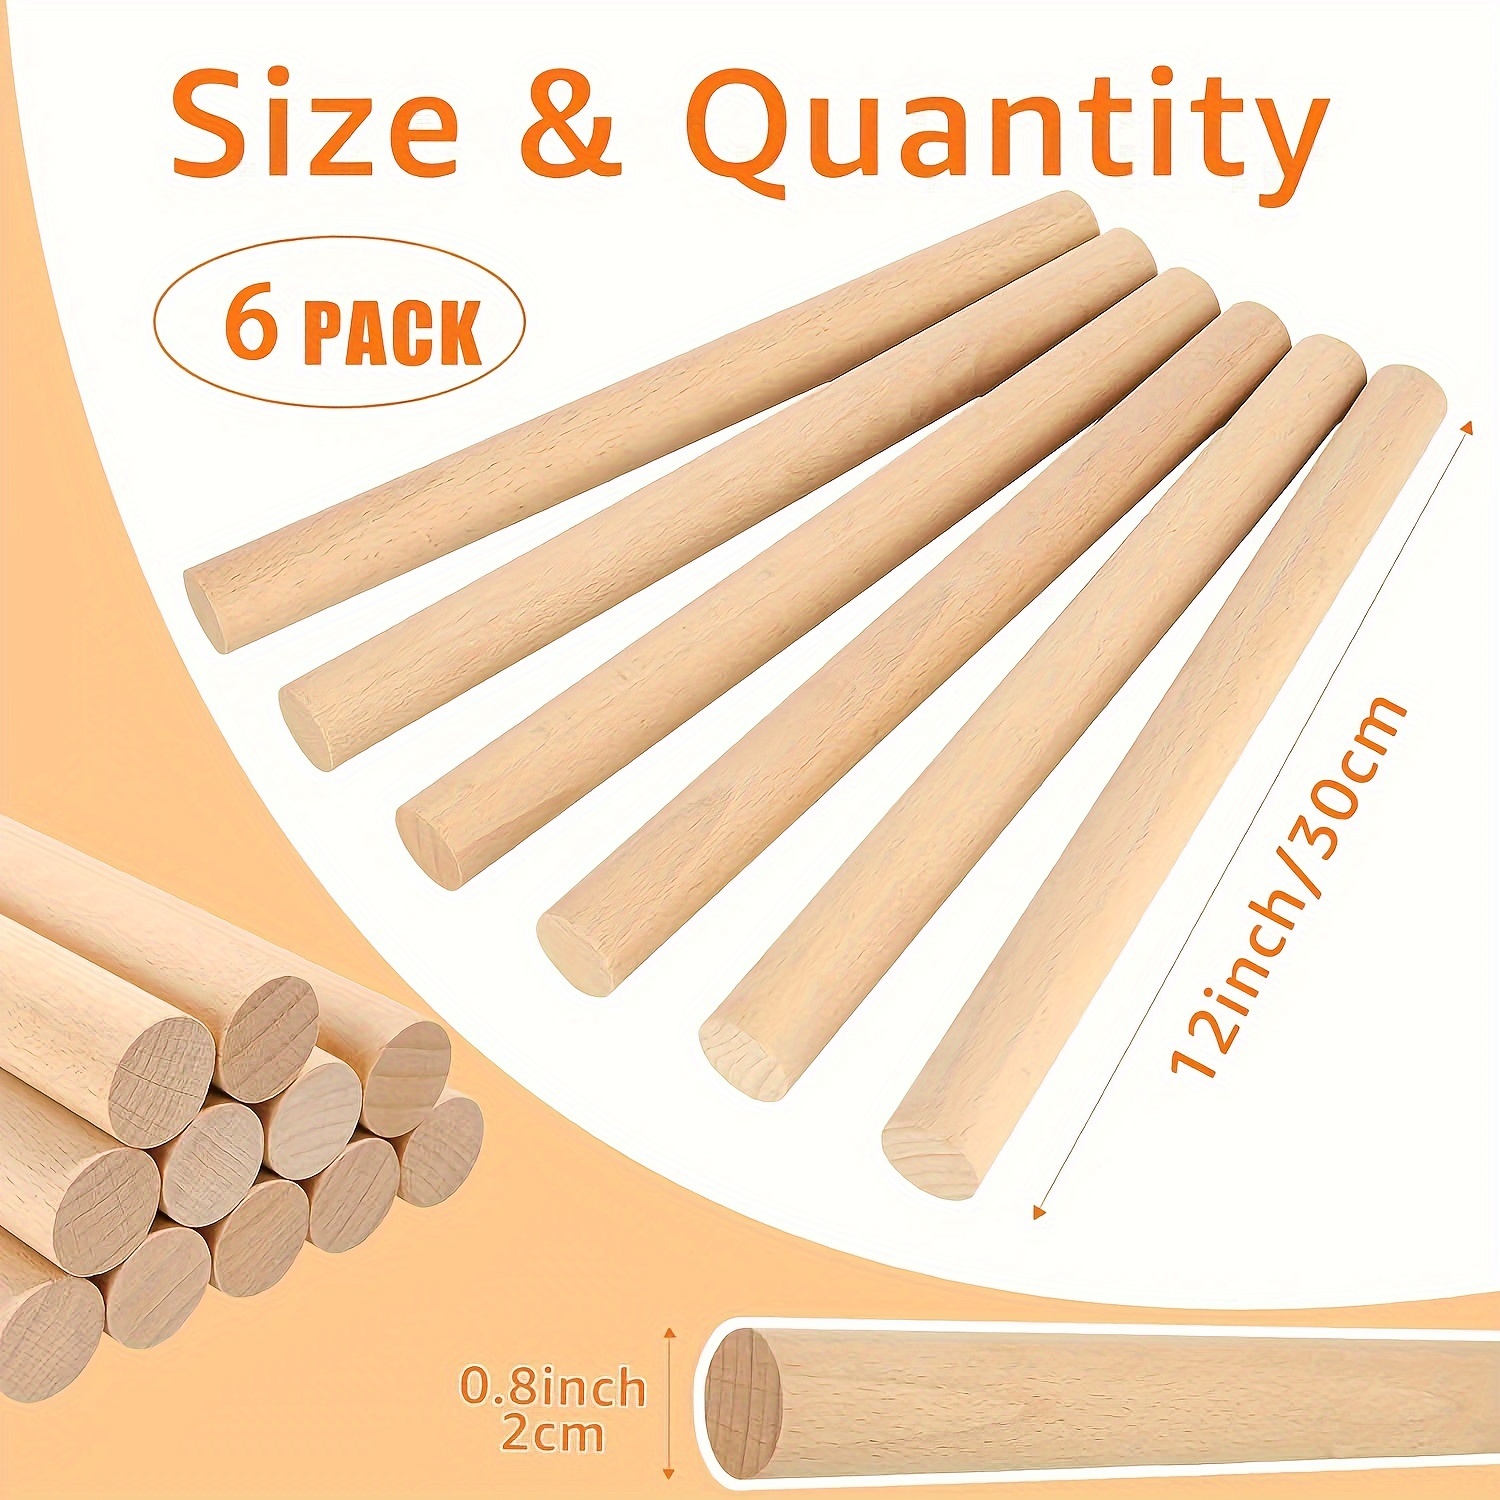  100PCS Dowel Rods 12 inch Wood Dowels 1/4 Inch Unfinished Wood  for Crafting Wood Craft Sticks Wooden Dowels for Crafts Bamboo Wood Rod  Bamboo Wood Sticks Long Wooden Sticks